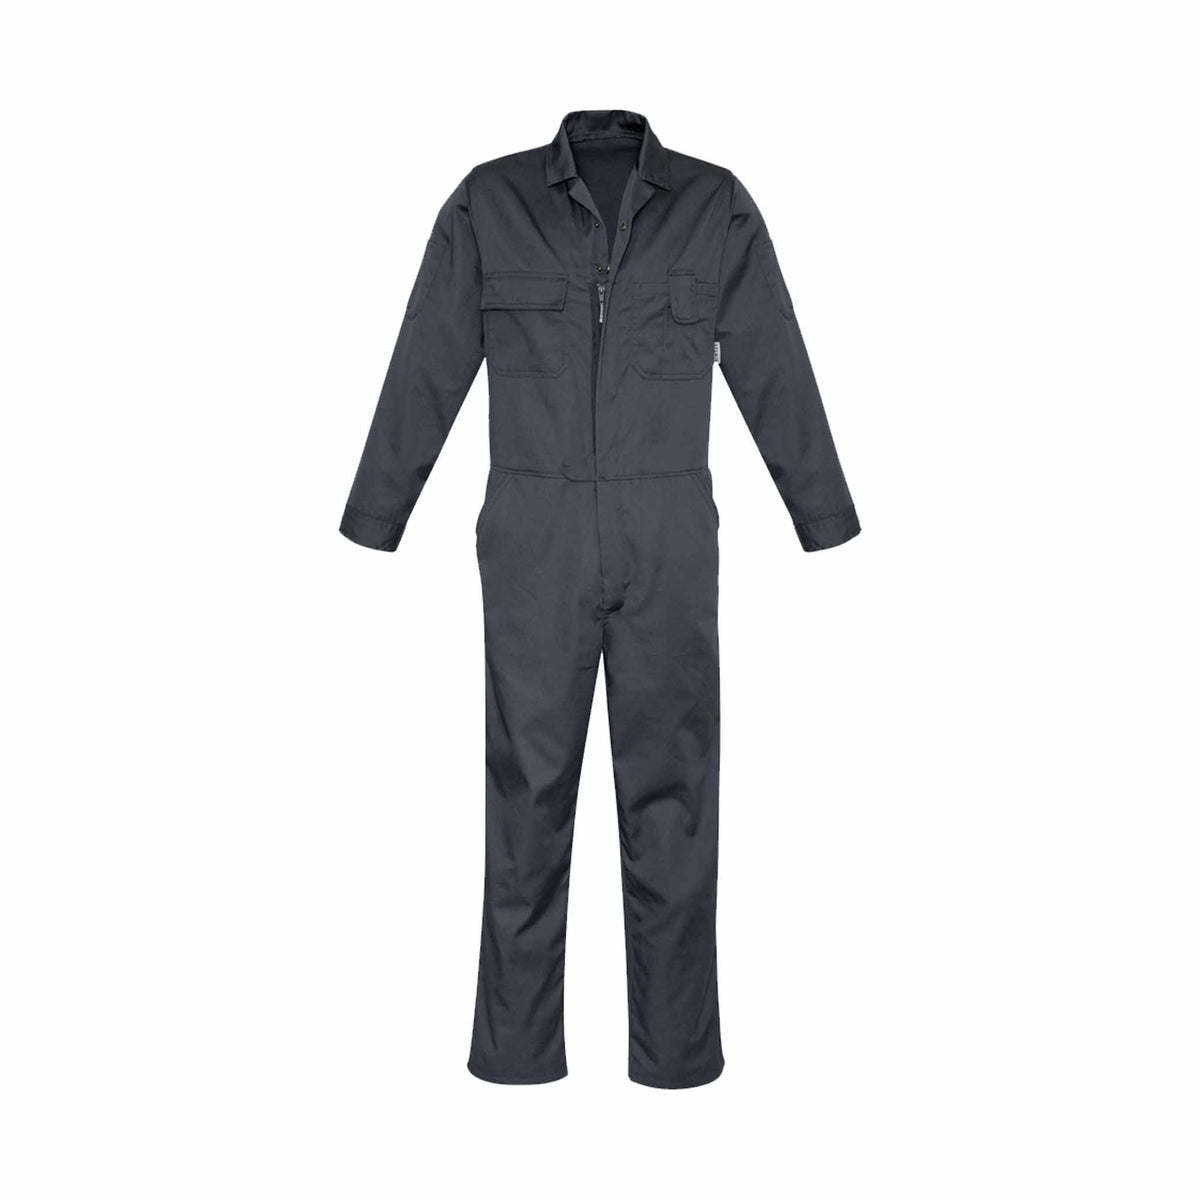 Long sleeve charcoal overalls front view